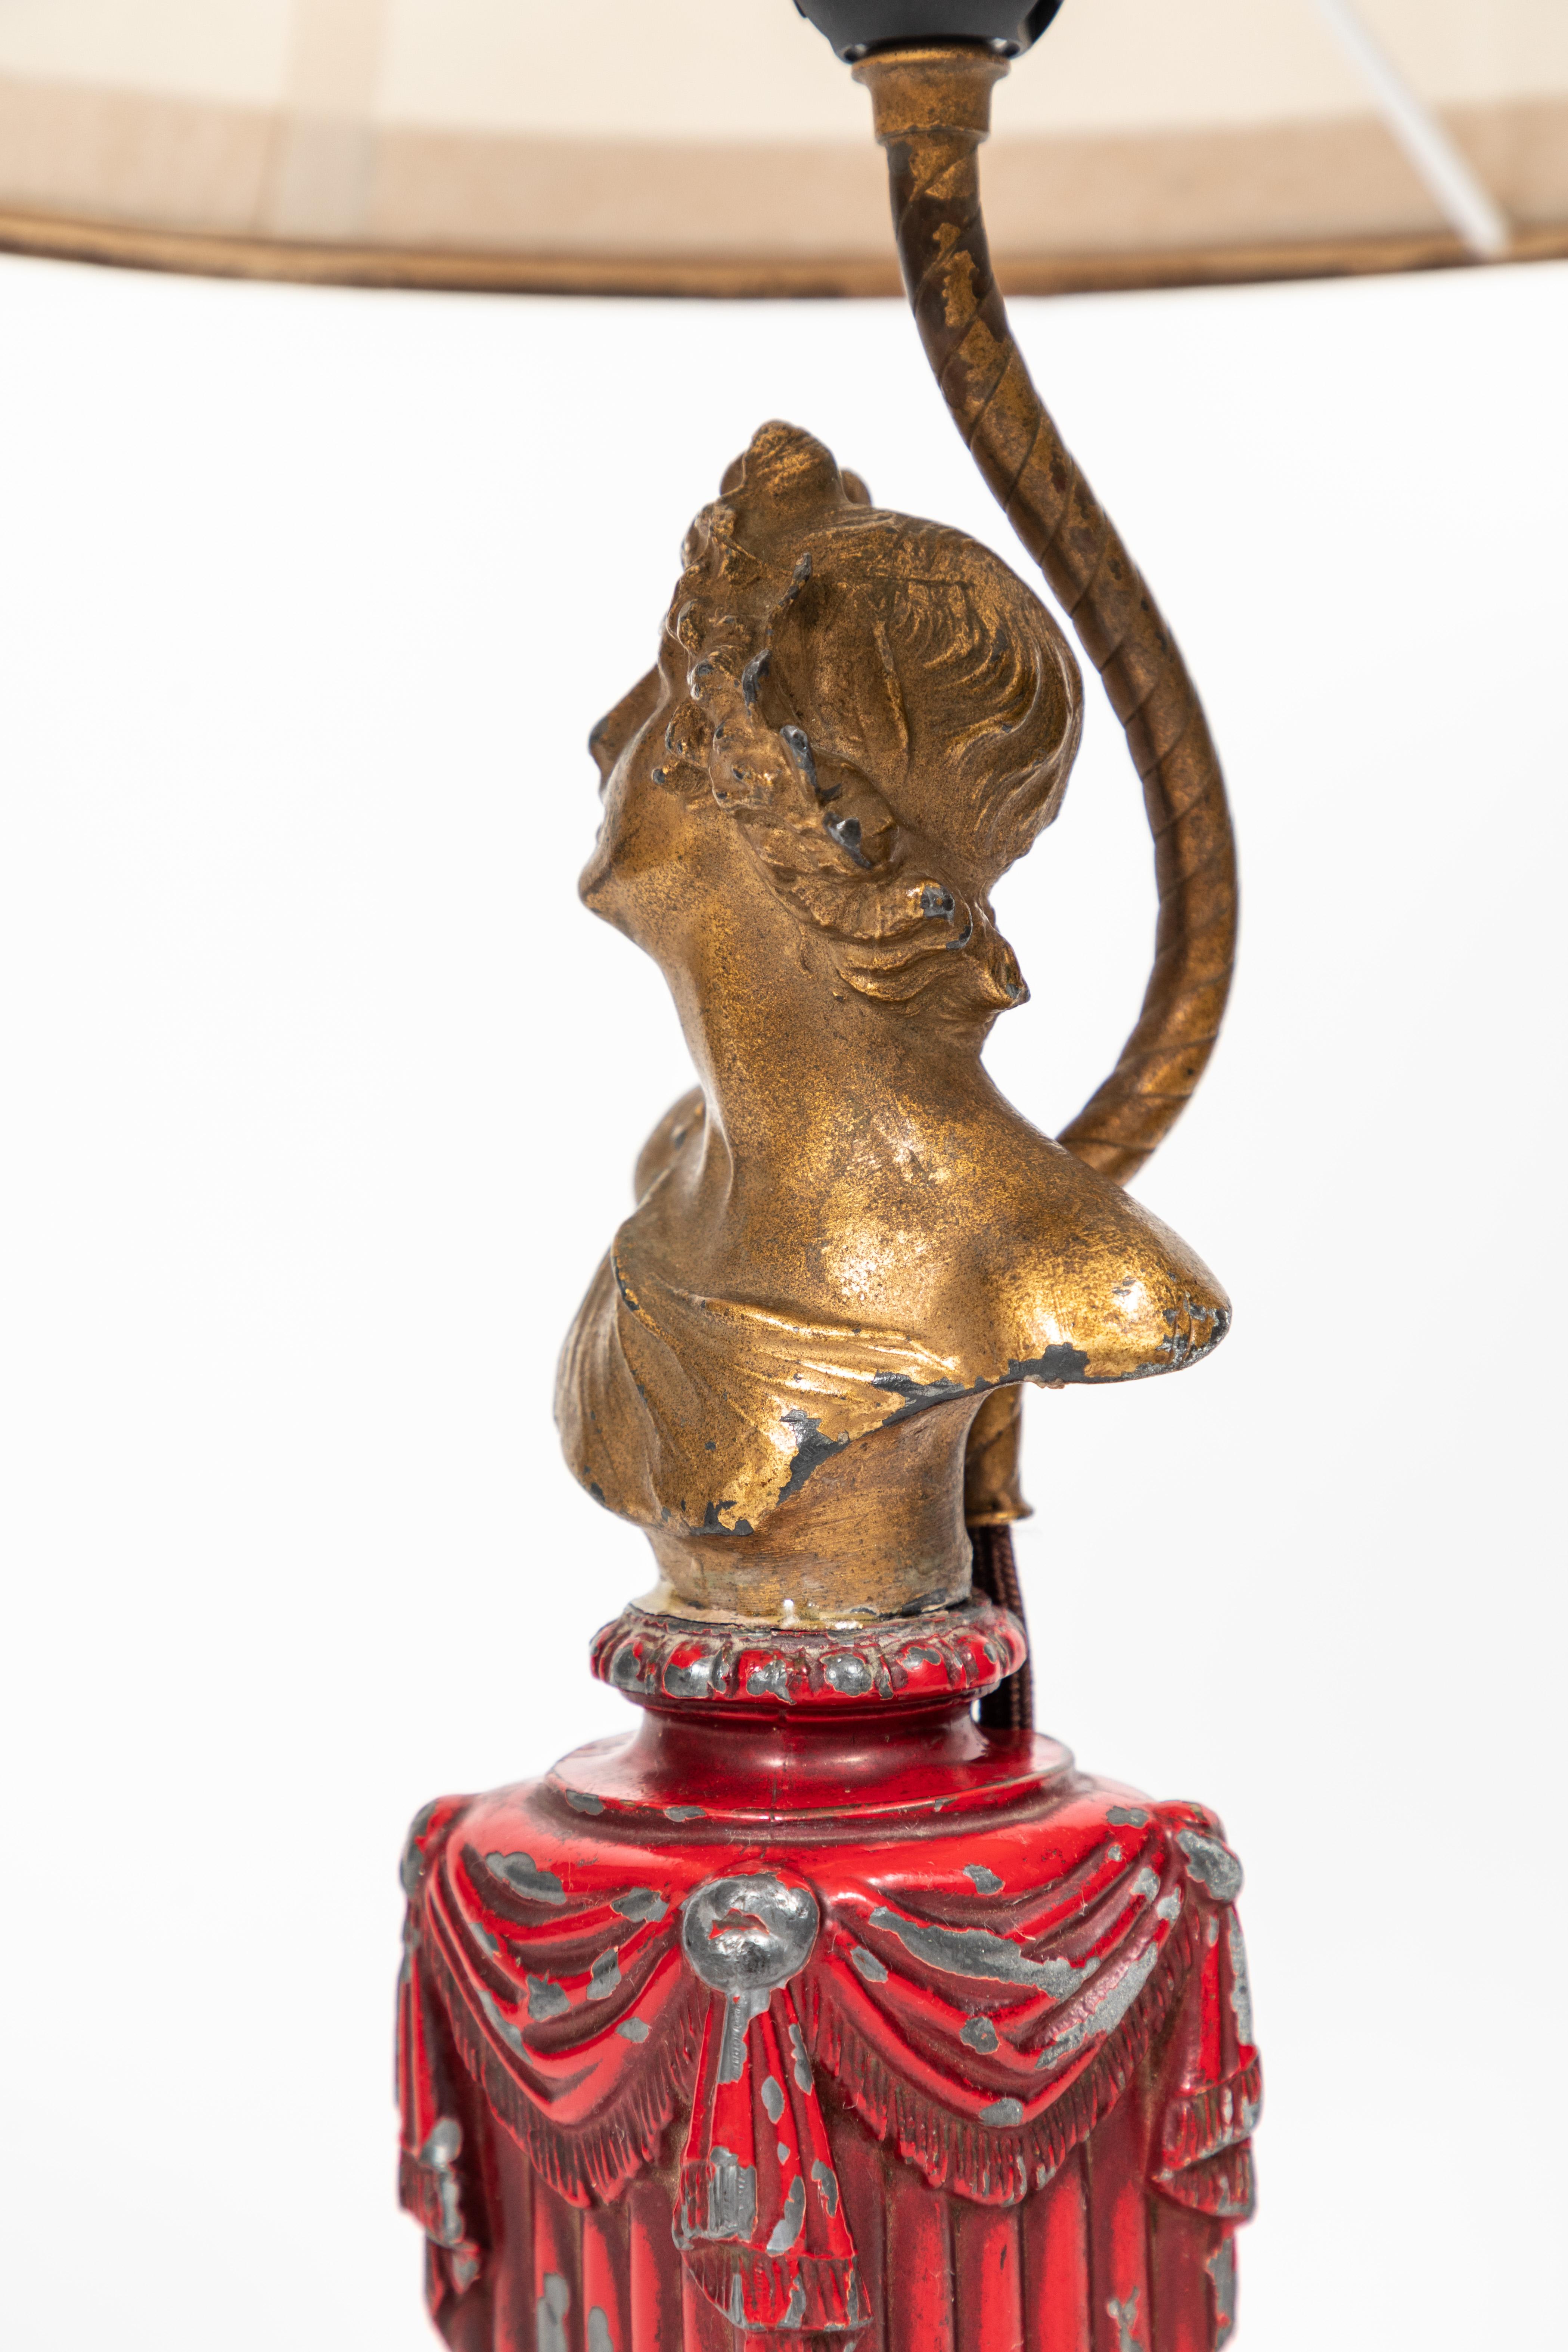 Oiled Vintage Metal Greek Bust Lamp with Original Red & Gold Paint